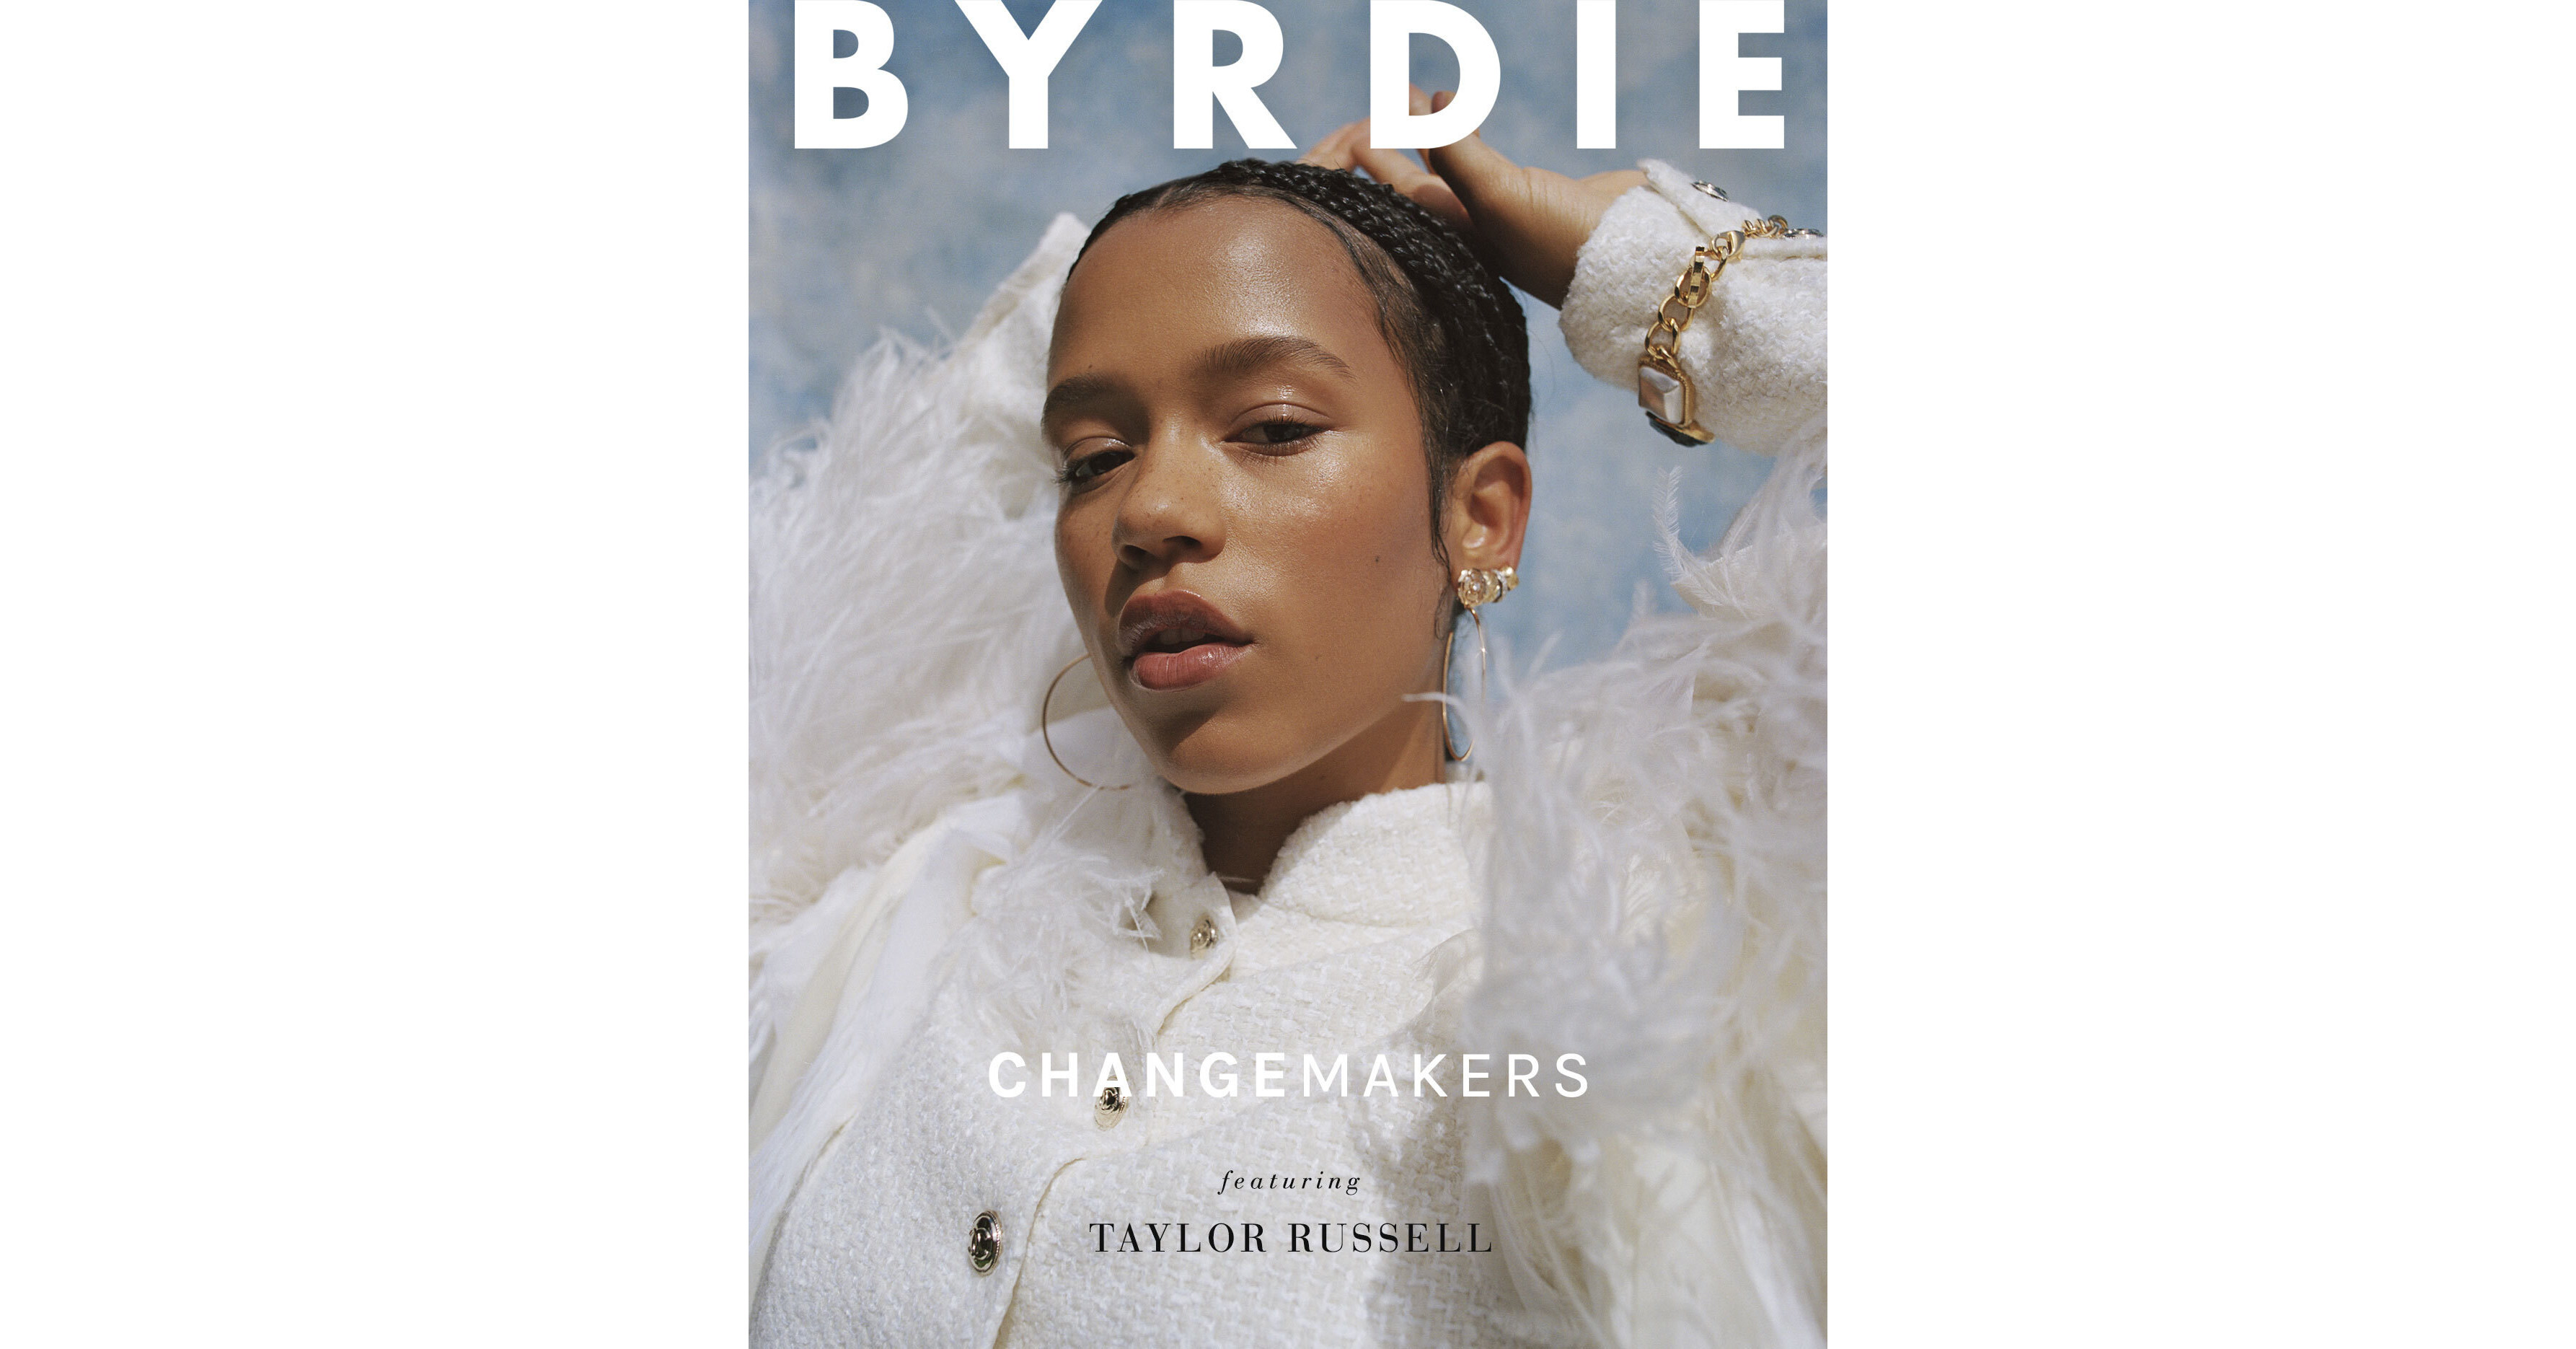 Byrdie launches its first-ever digital magazine